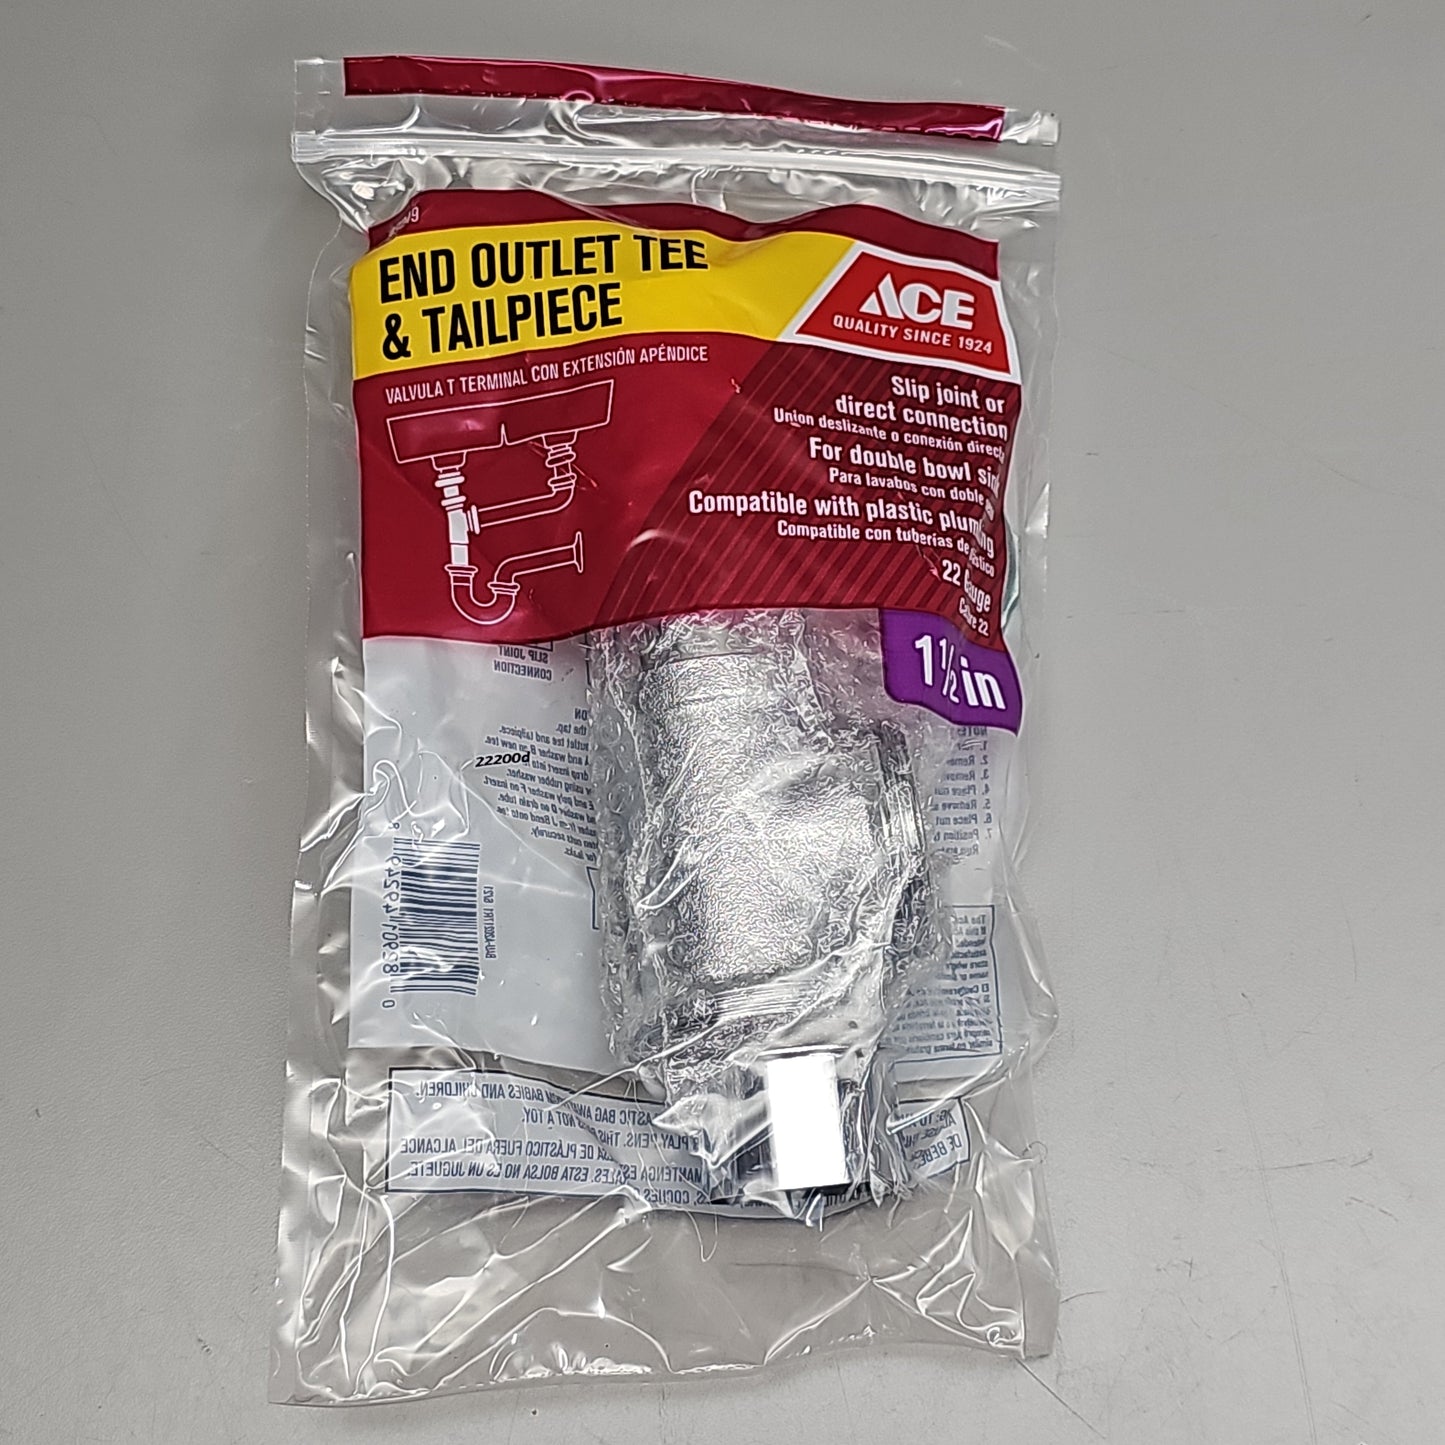 ACE End Outlet Tee & Tailpiece 1.5" AH20217 49249 (New)